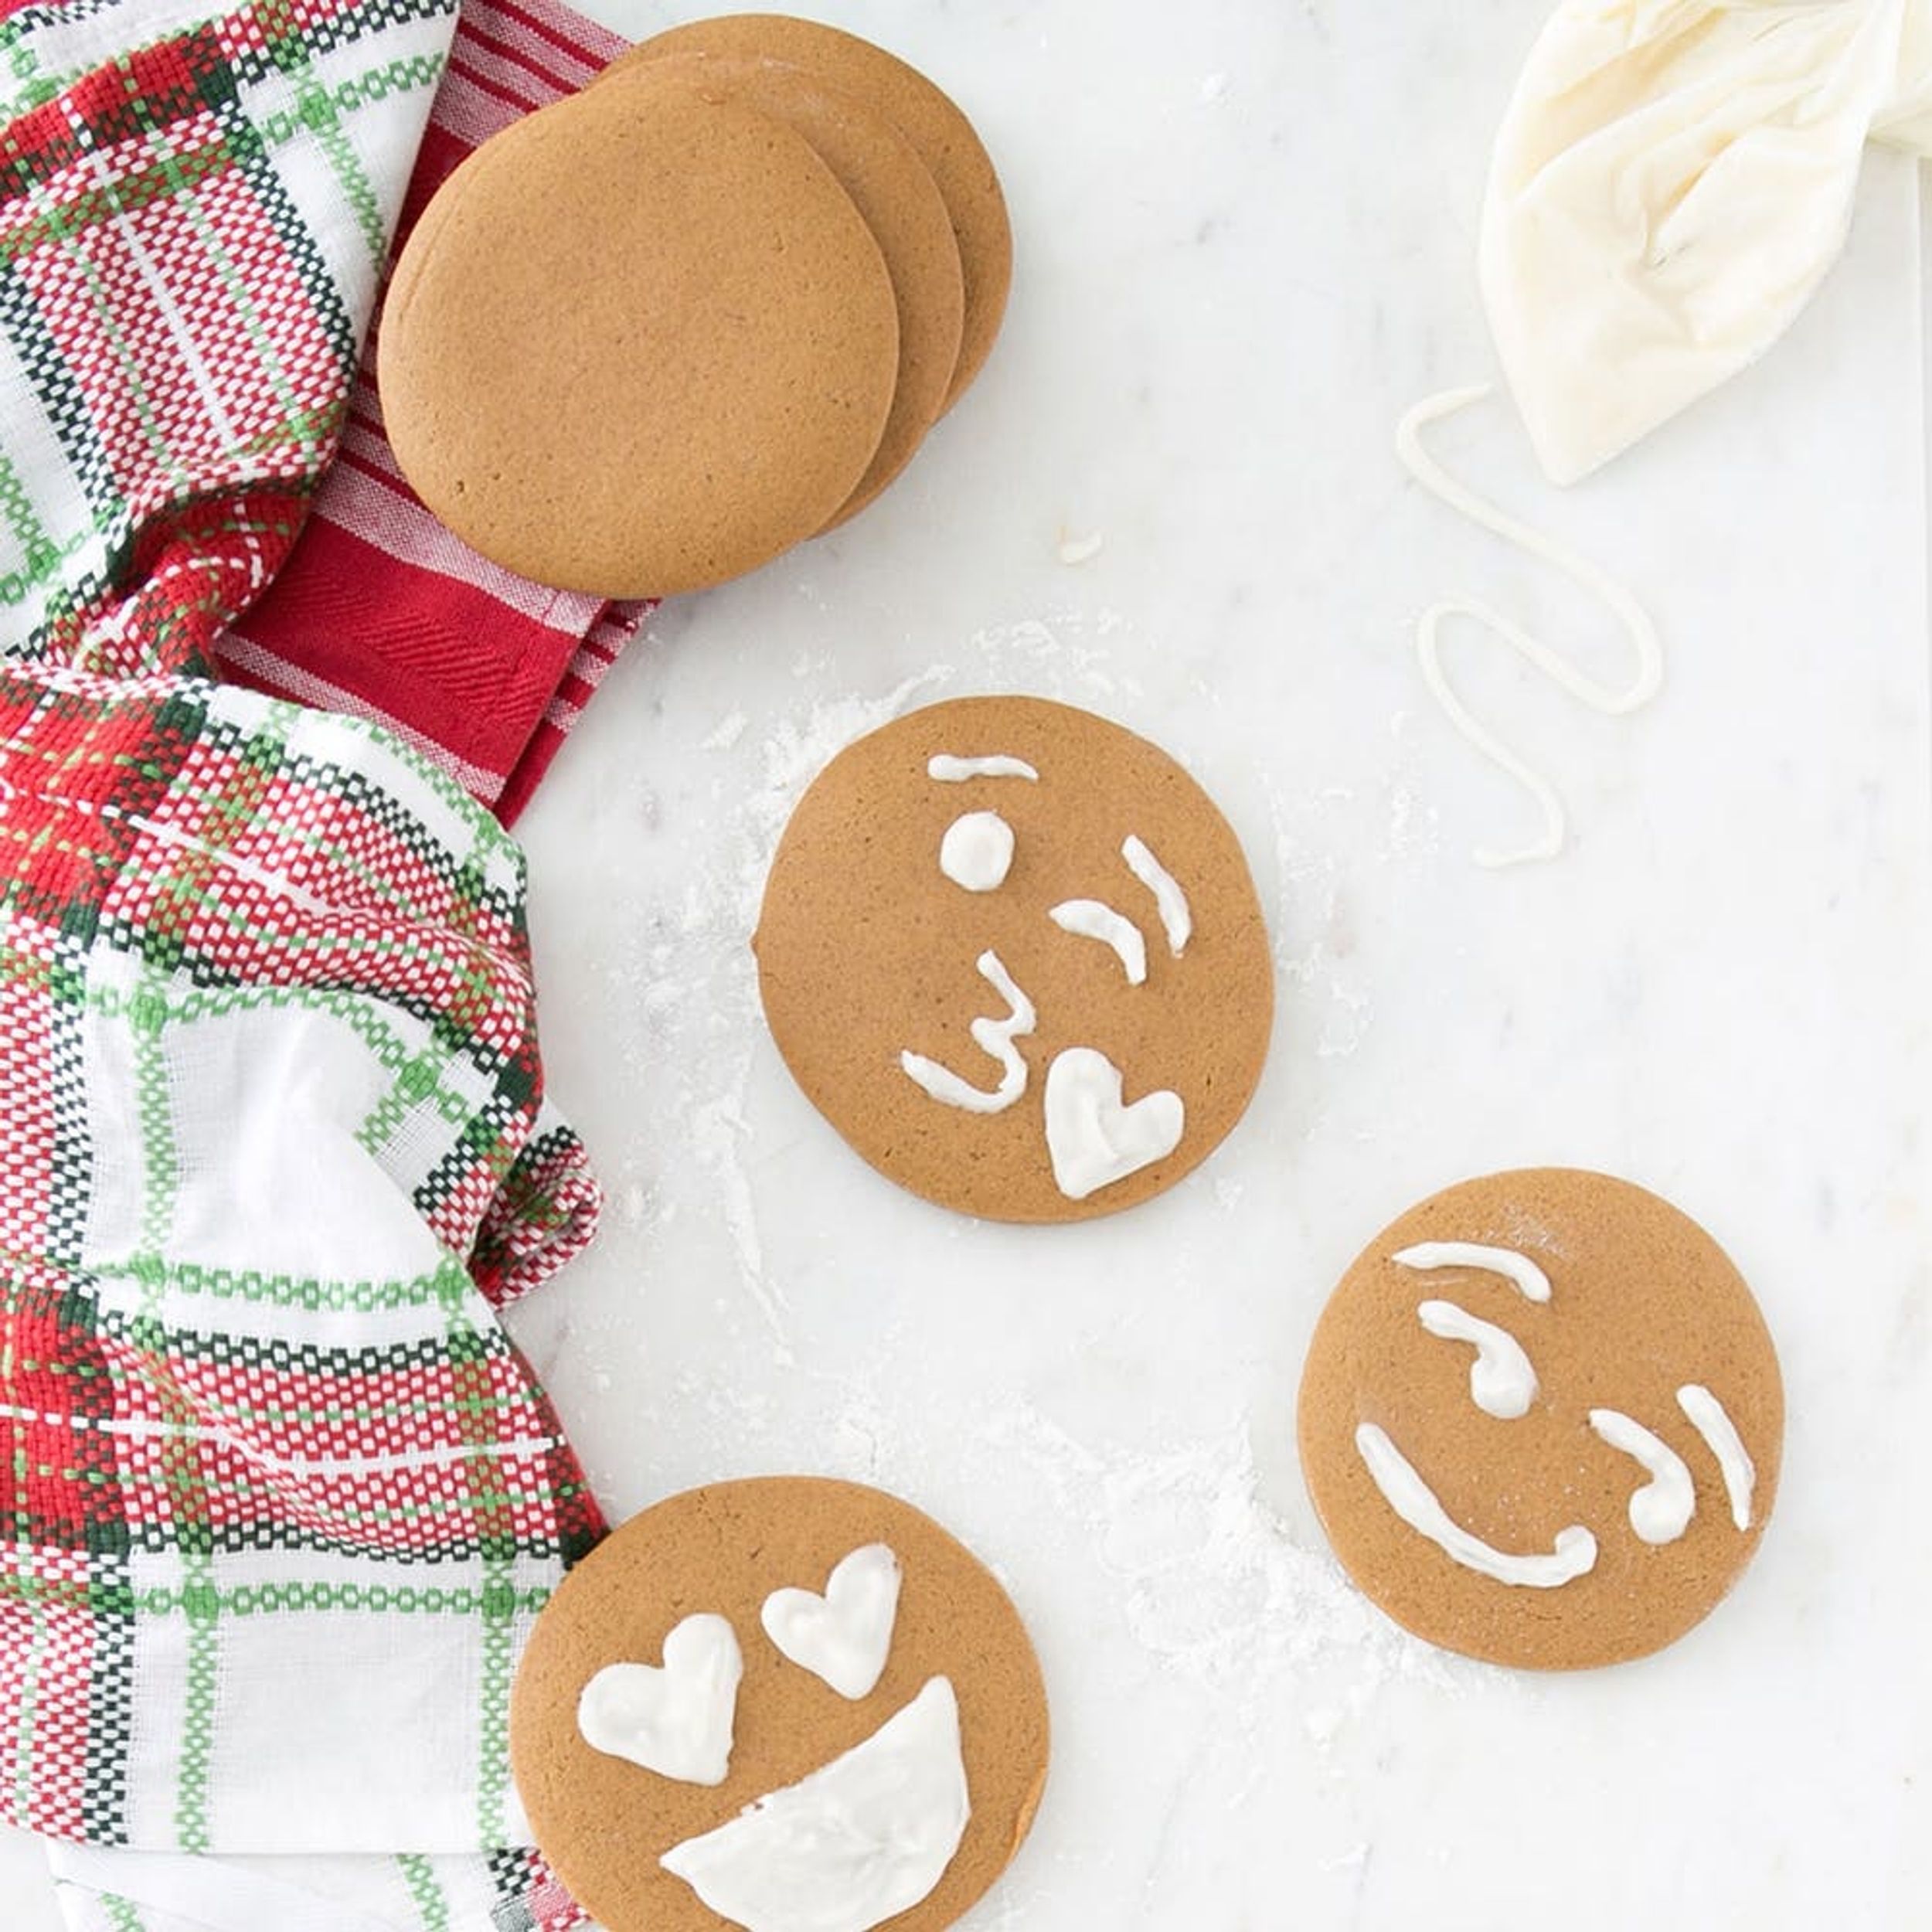 This Gingerbread Emoji Cookies Recipe Will Make You :heart_eyes: